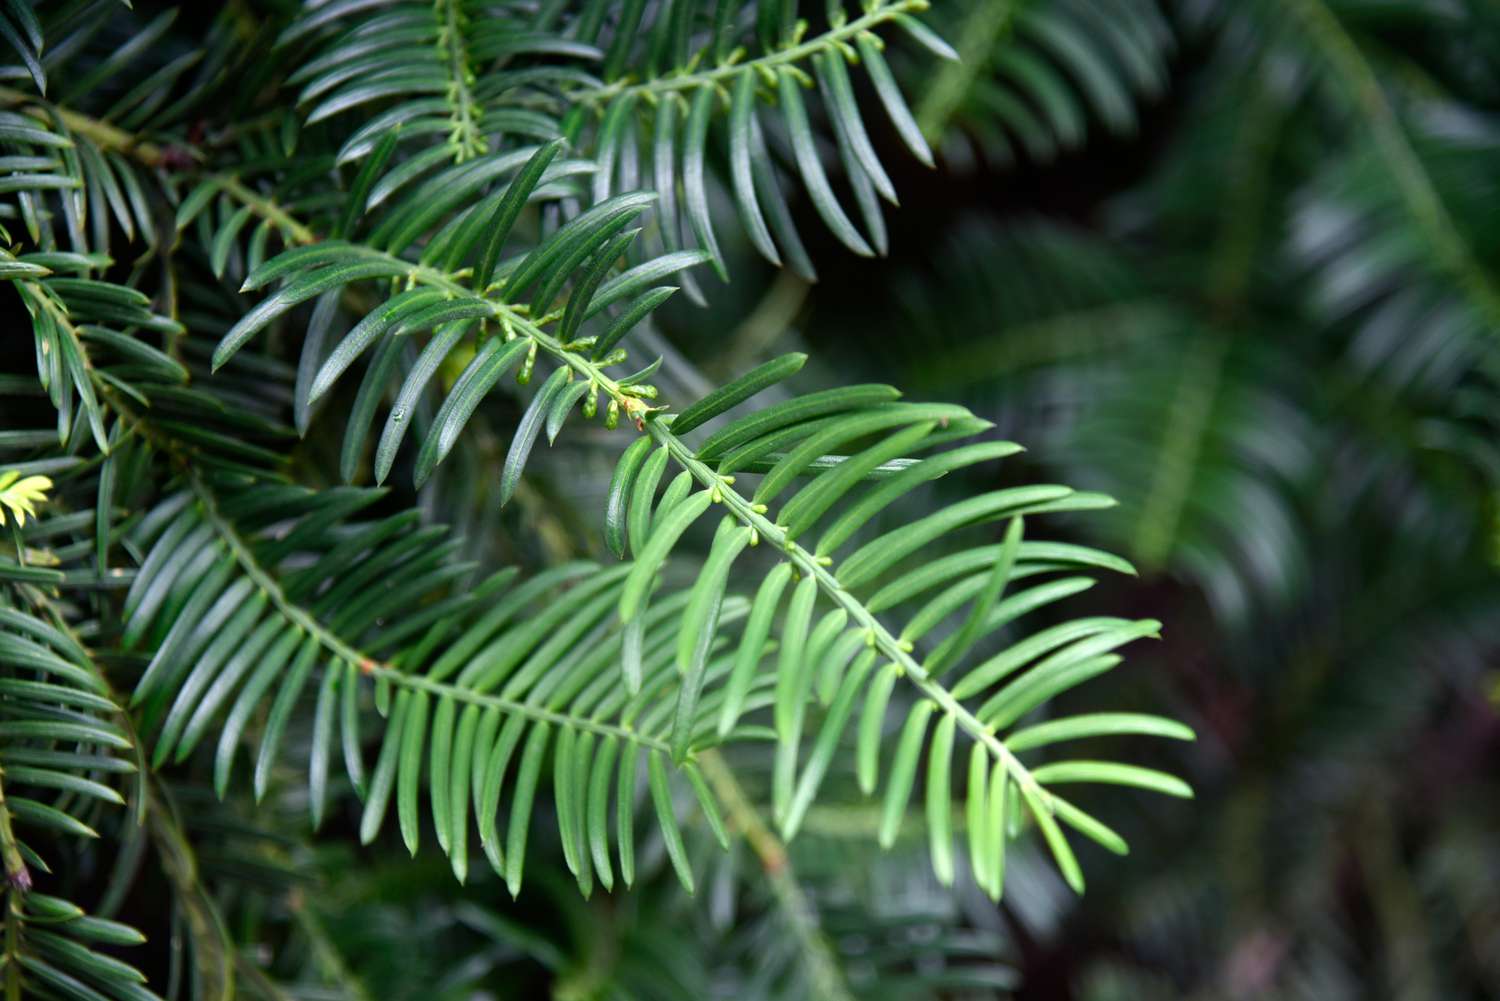 Japanese plum yew shrub branch with long needle-like leaves closeup